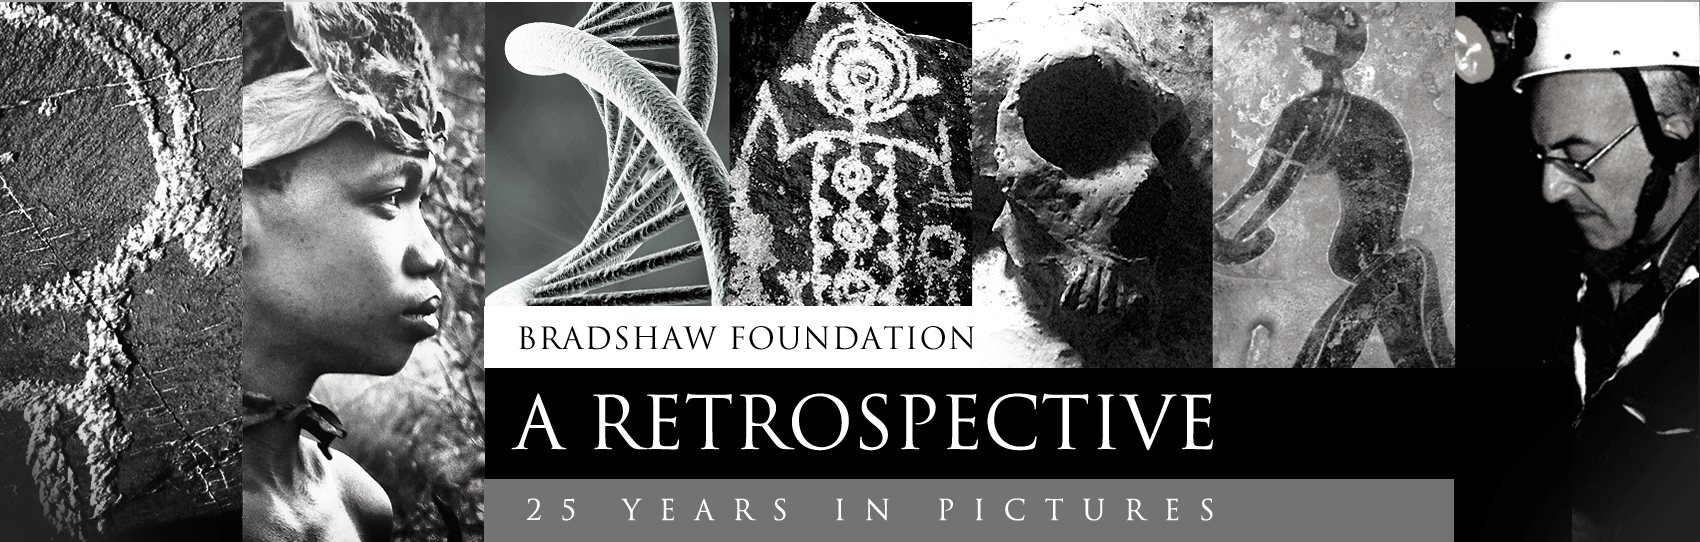 Bradshaw Foundation 25 Years A Retrospective in Pictures